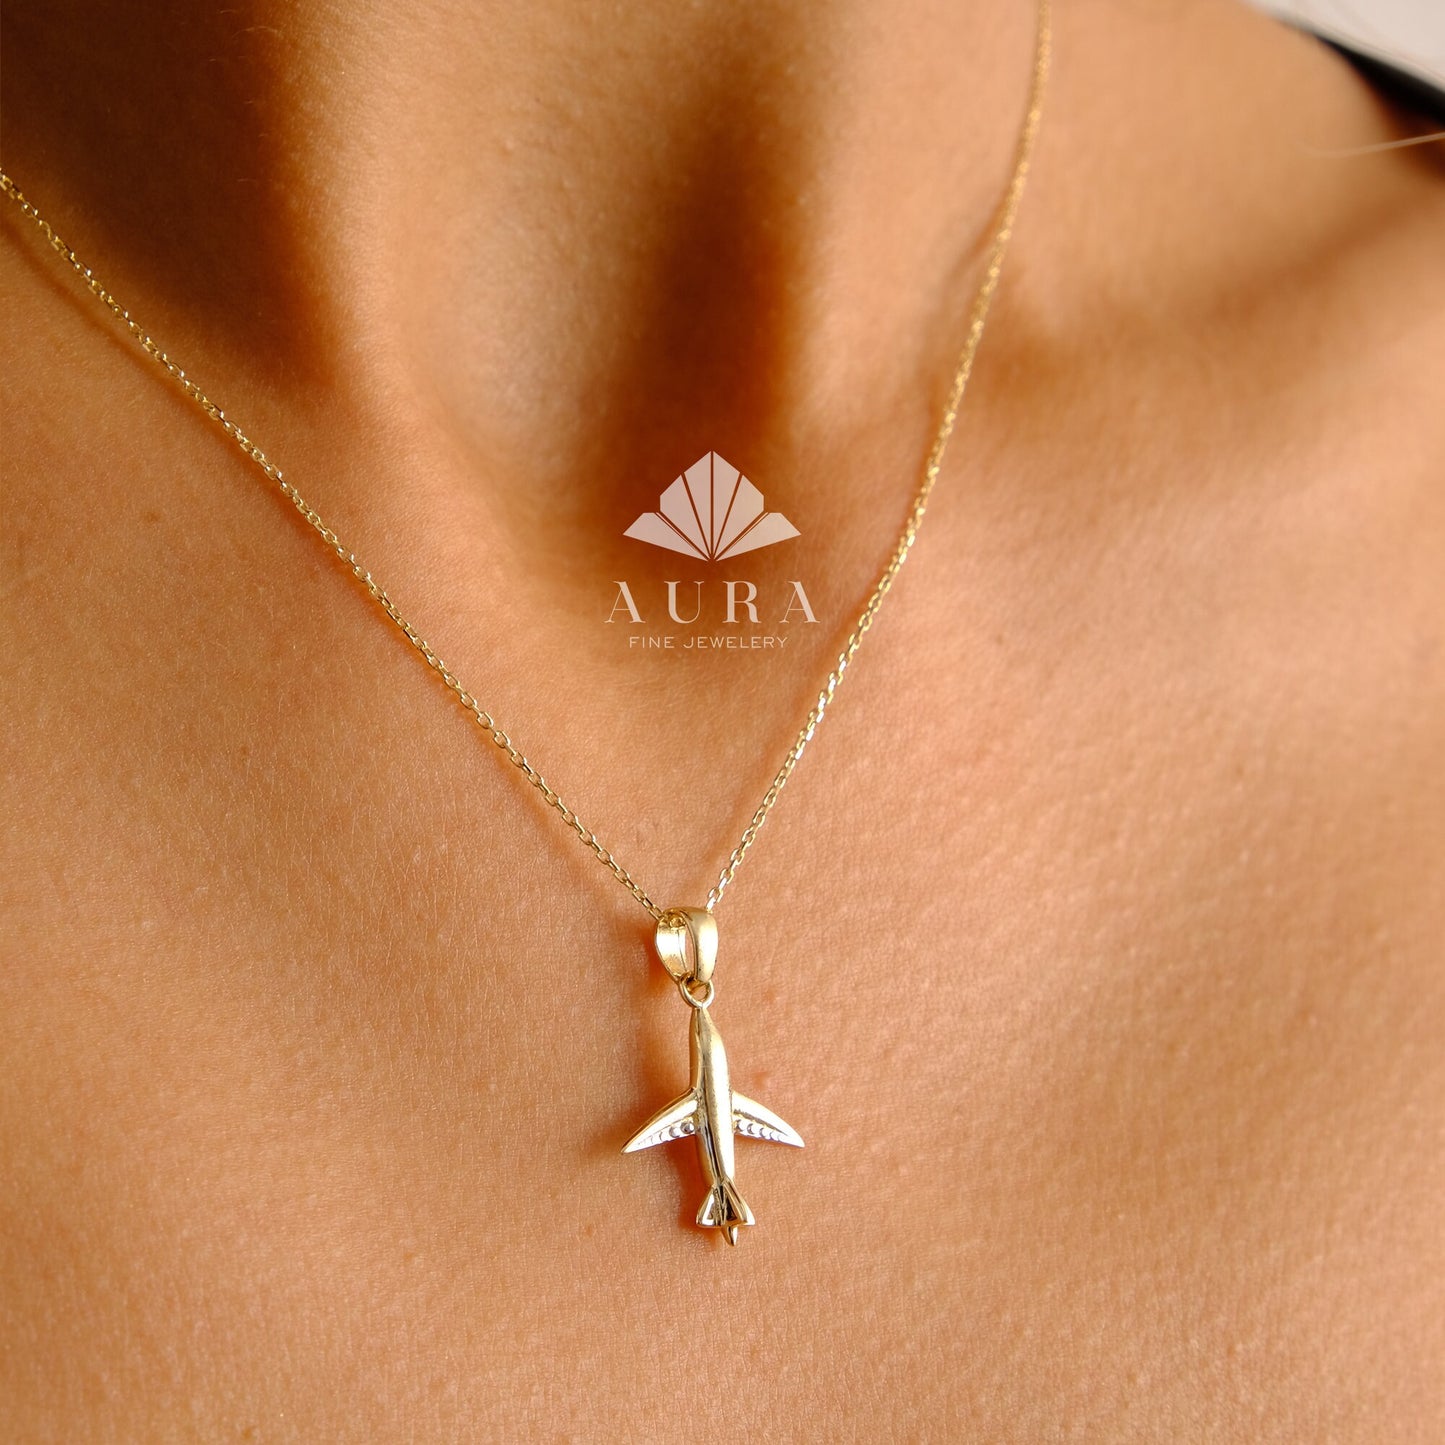 14K Gold Airplane Necklace, Airplane Pendant, Tiny Airplane Charm, Dainty Gold Plane Necklace, Travel Jewelry, Pilots Flight Attendant Gift